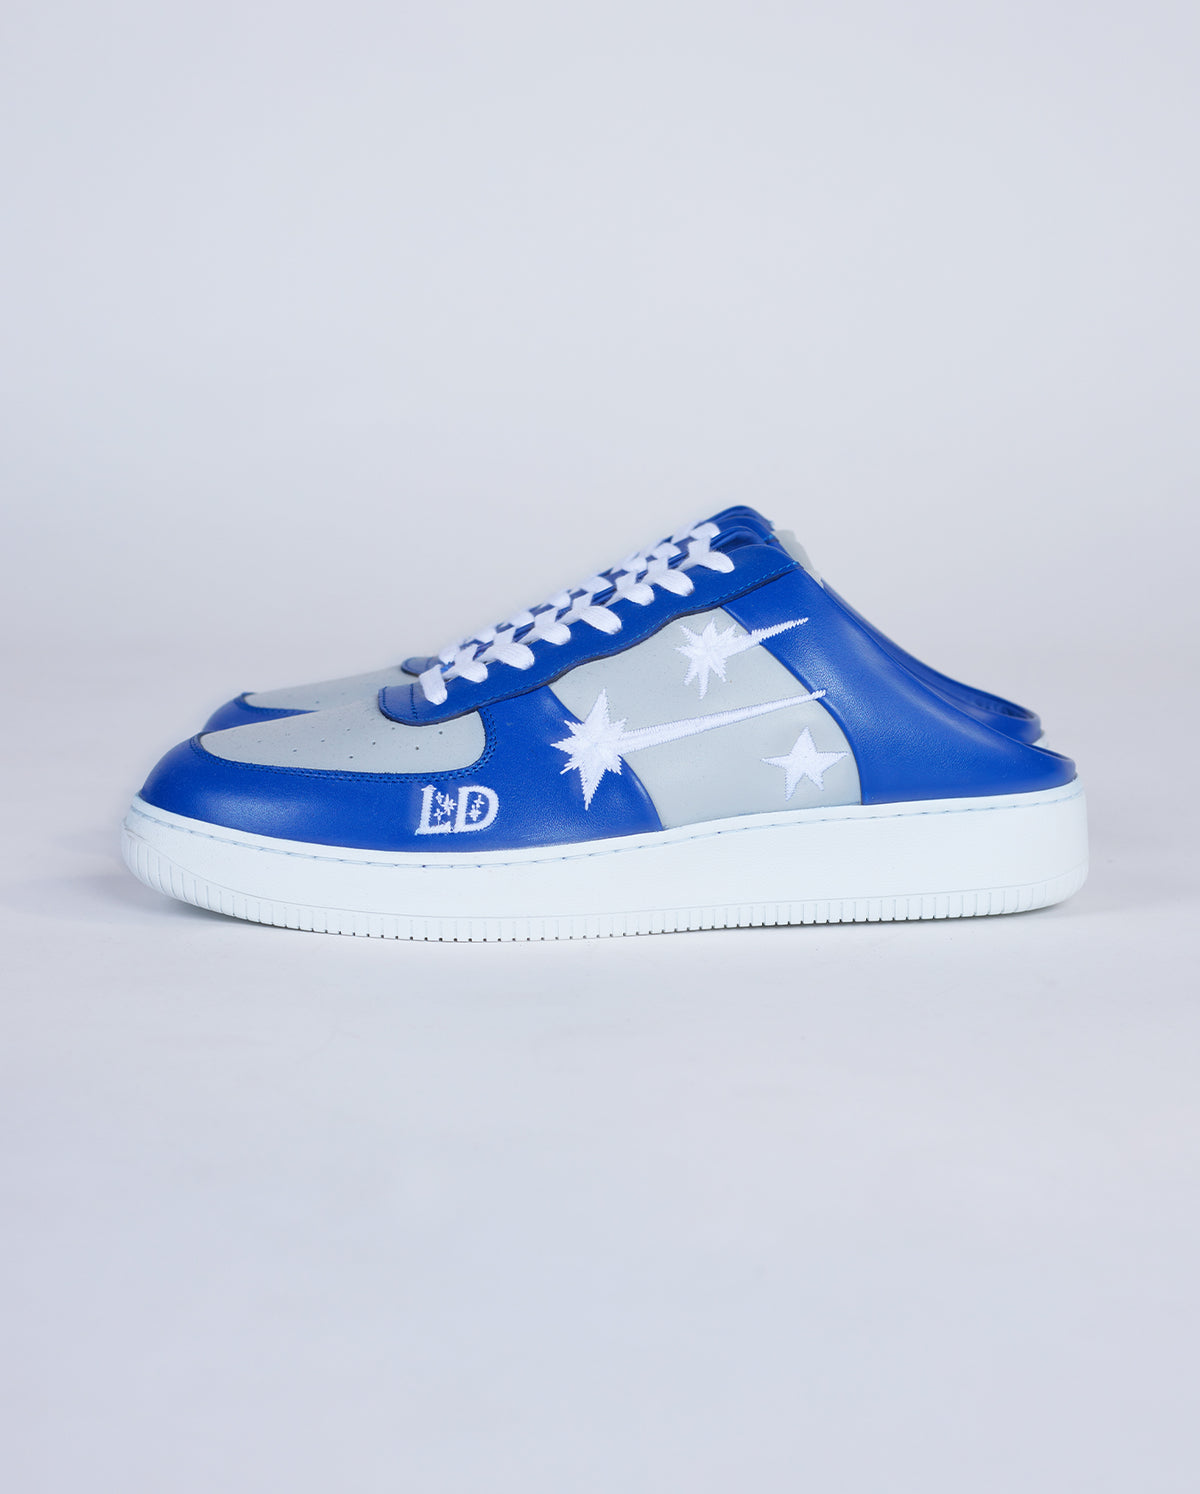 Space Force 1 - Blue